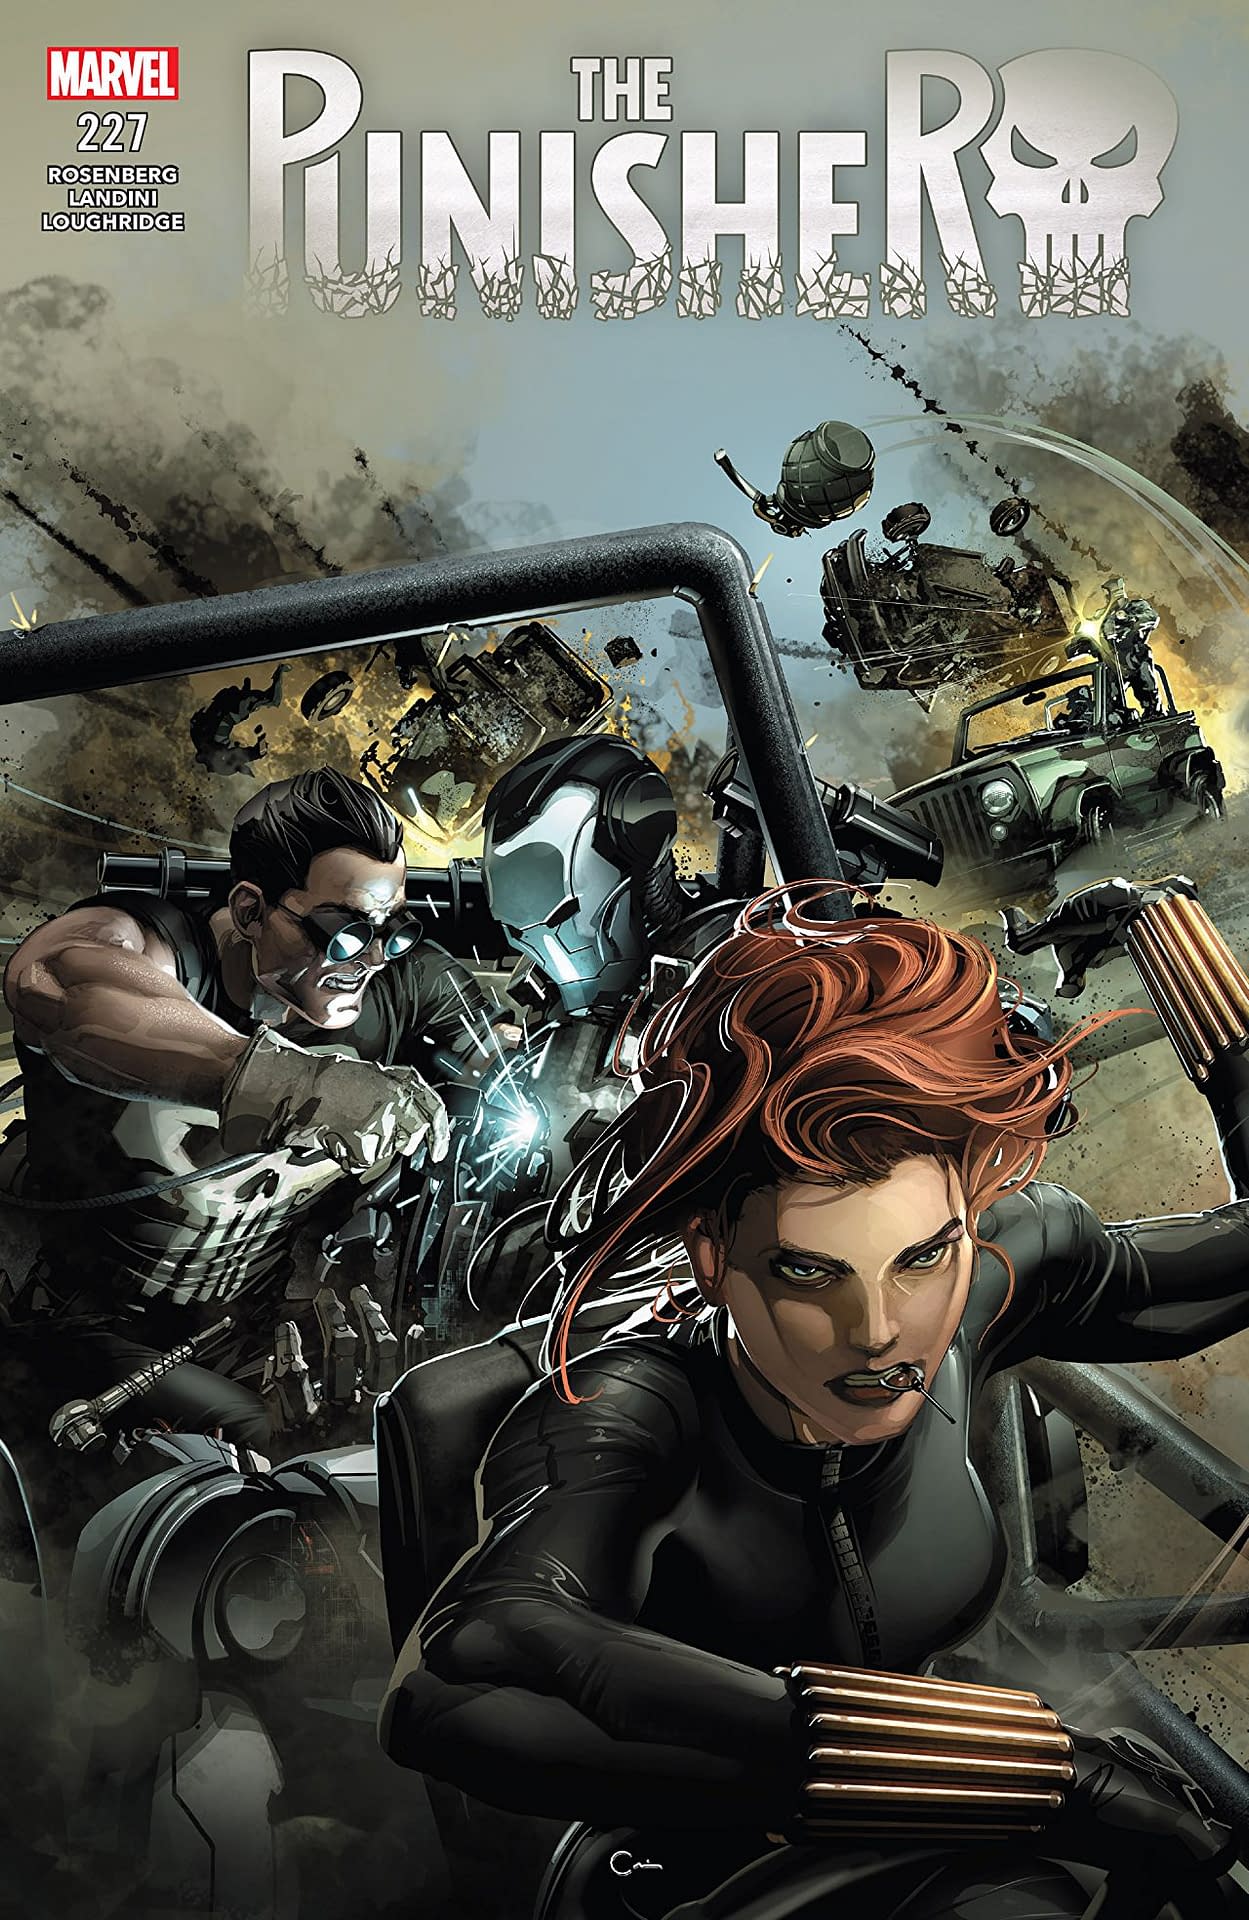 The Punisher #227 Review: Hunting Hydra With Black Widow And Winter Soldier